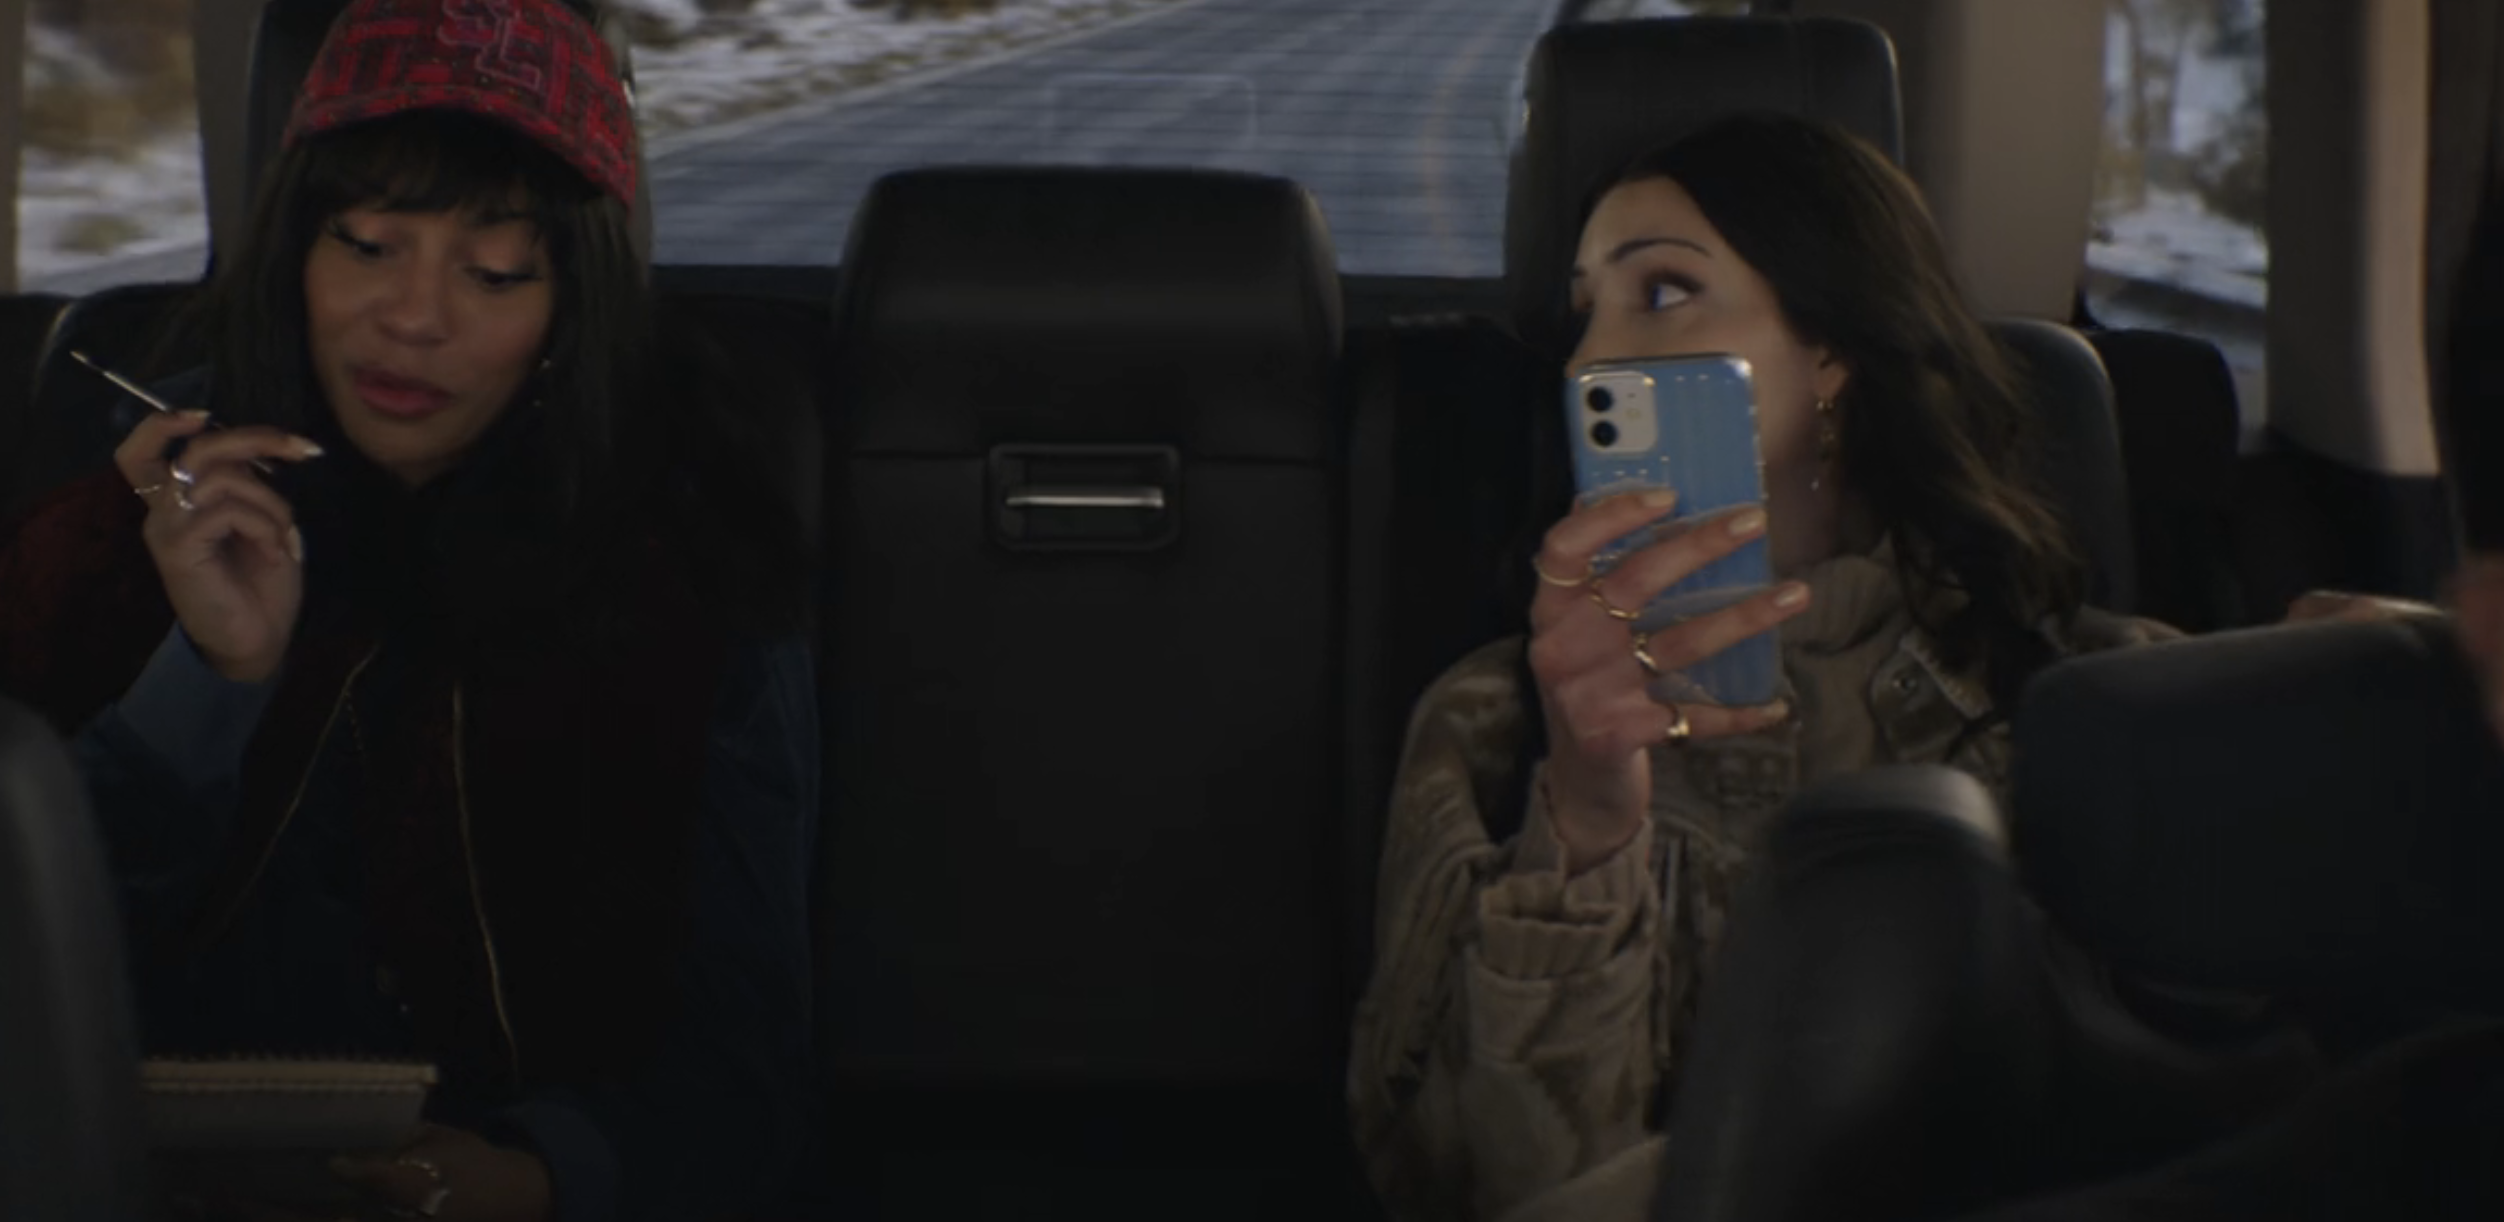 Two women in a car; one is eating as the other takes a selfie